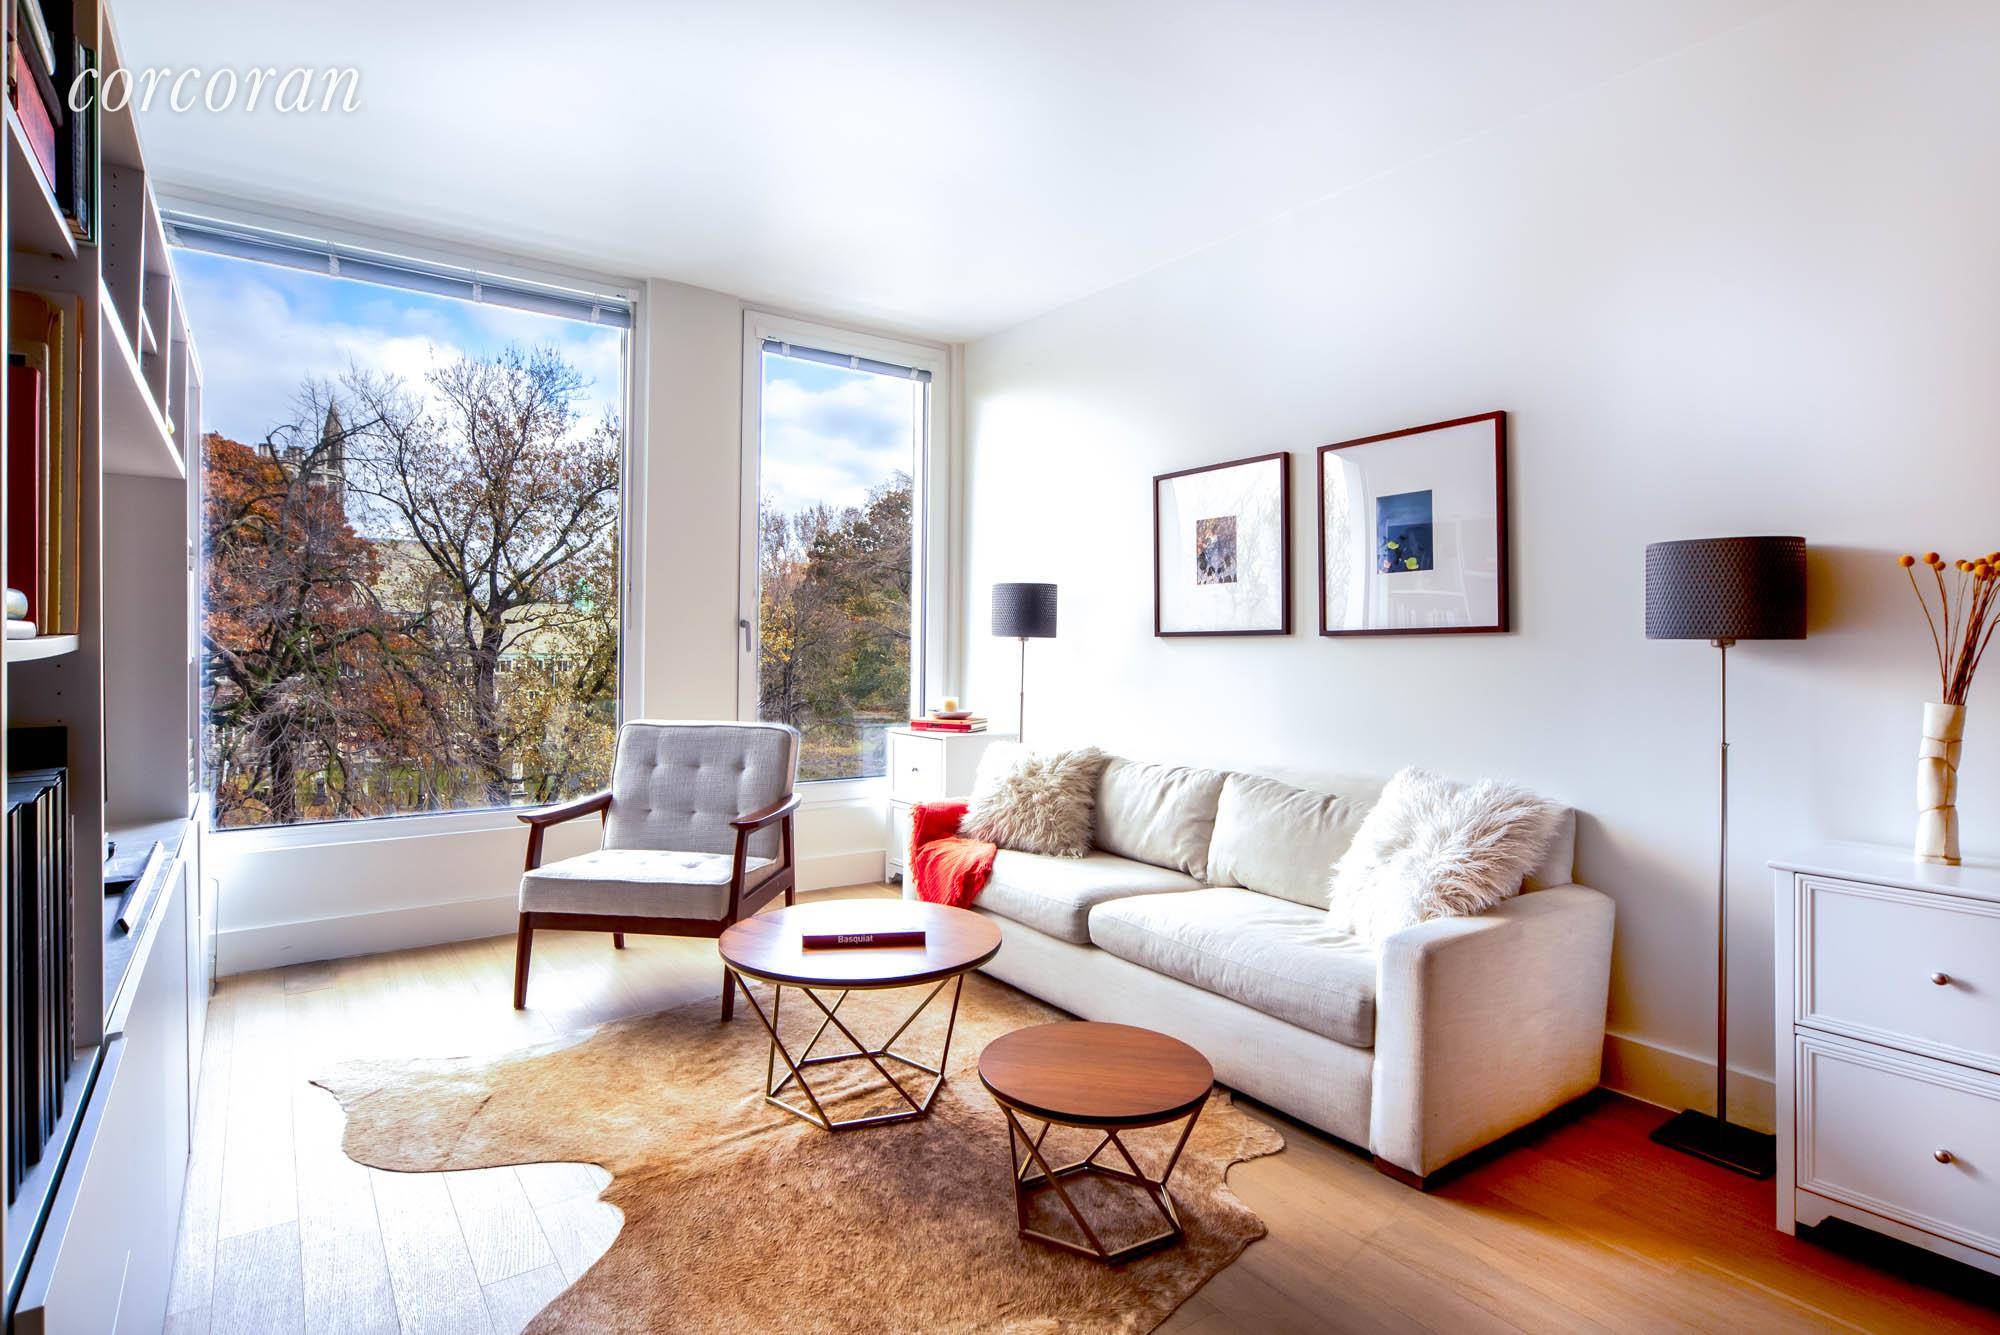 Just listed and No Fee Perch Harlem is Upper Manhattan's newest and innovative No Fee luxury rental building located at 542 W 153rd Street in the historic Hamilton Heights neighborhood ...